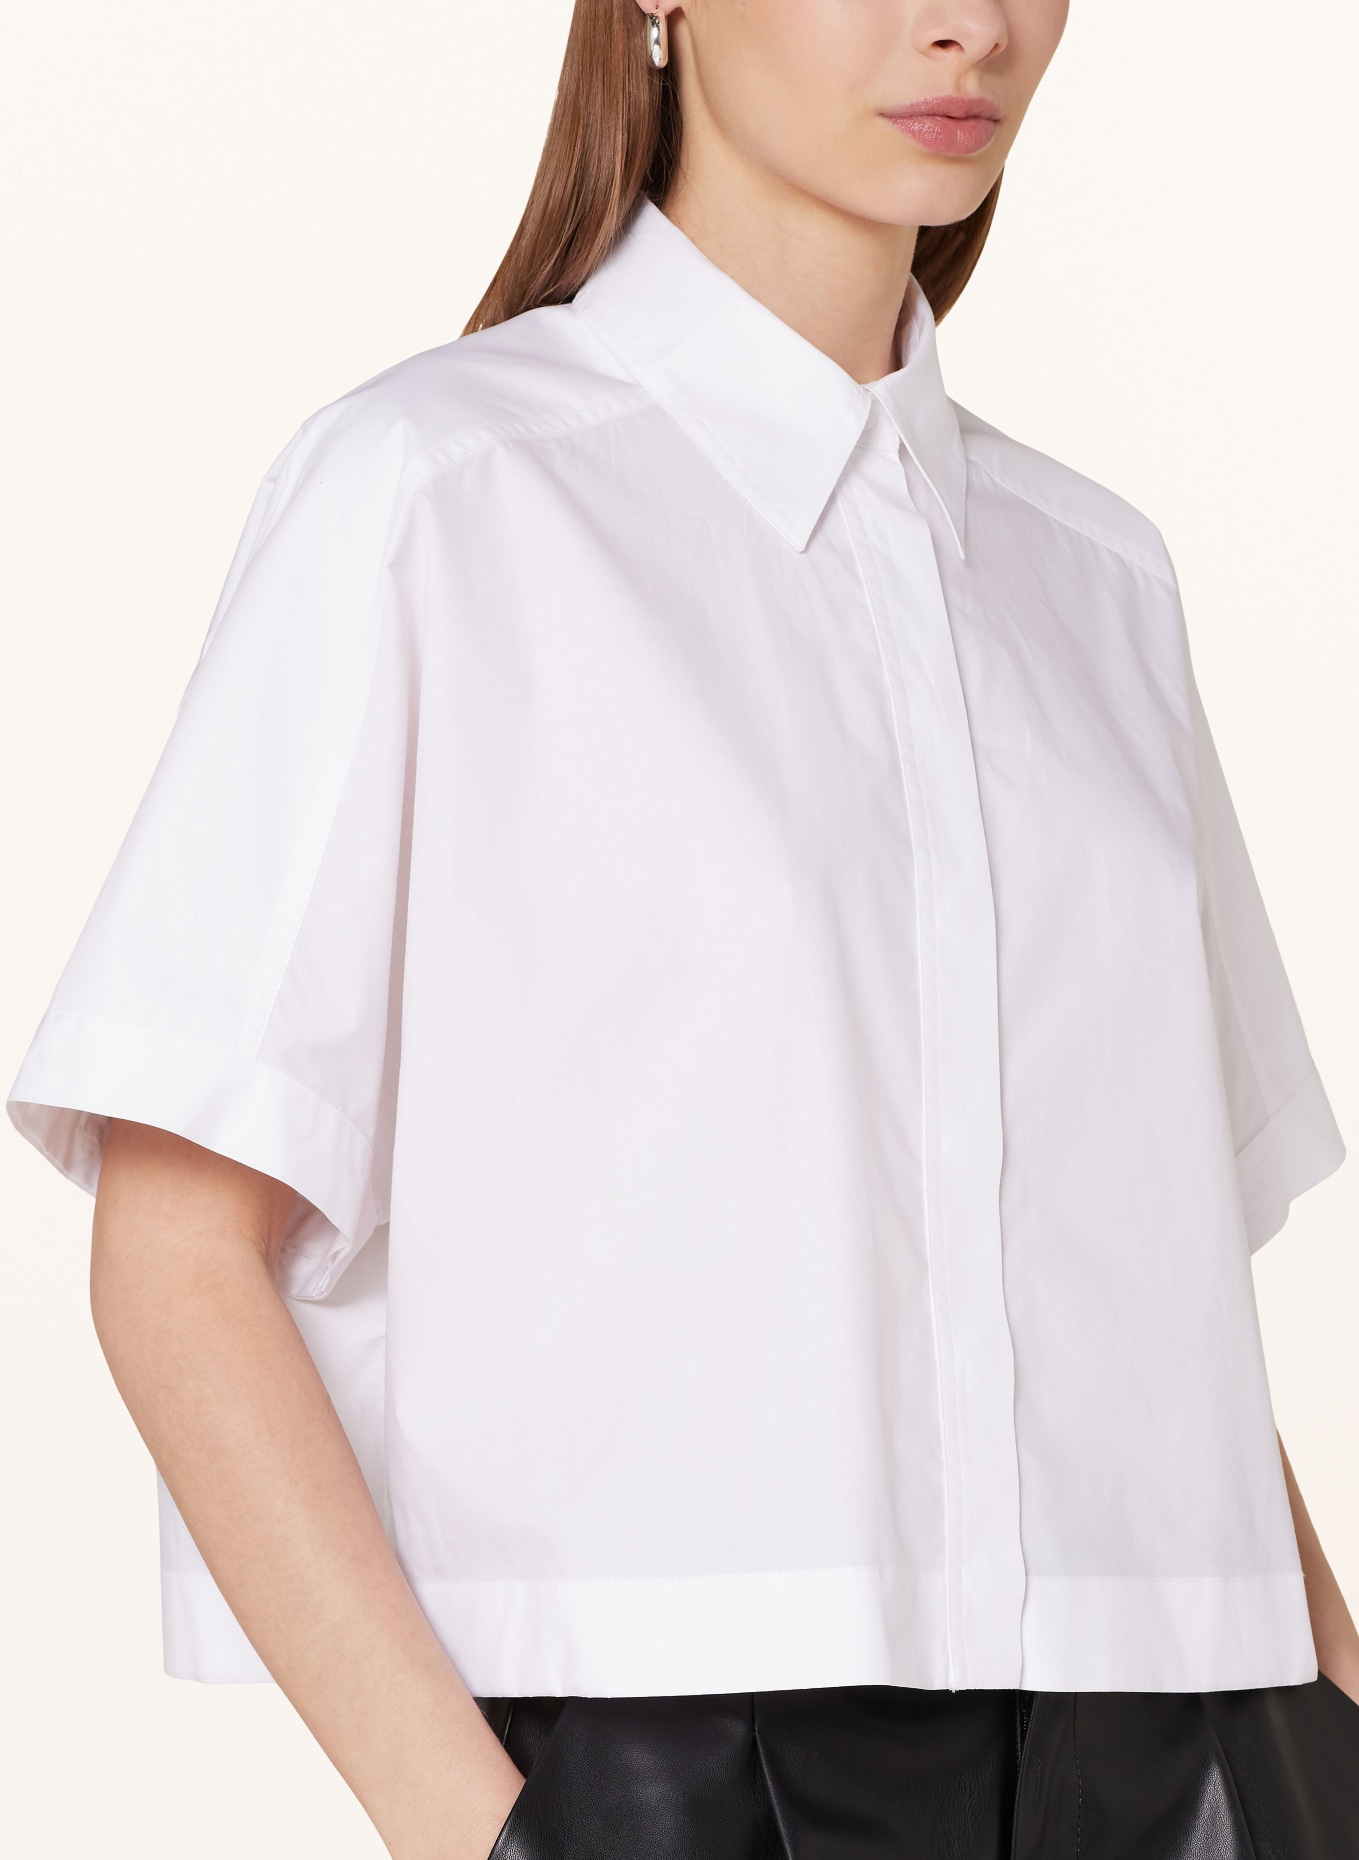 IVY OAK Cropped shirt blouse ELVIRA with detachable sleeves, Color: WHITE (Image 4)